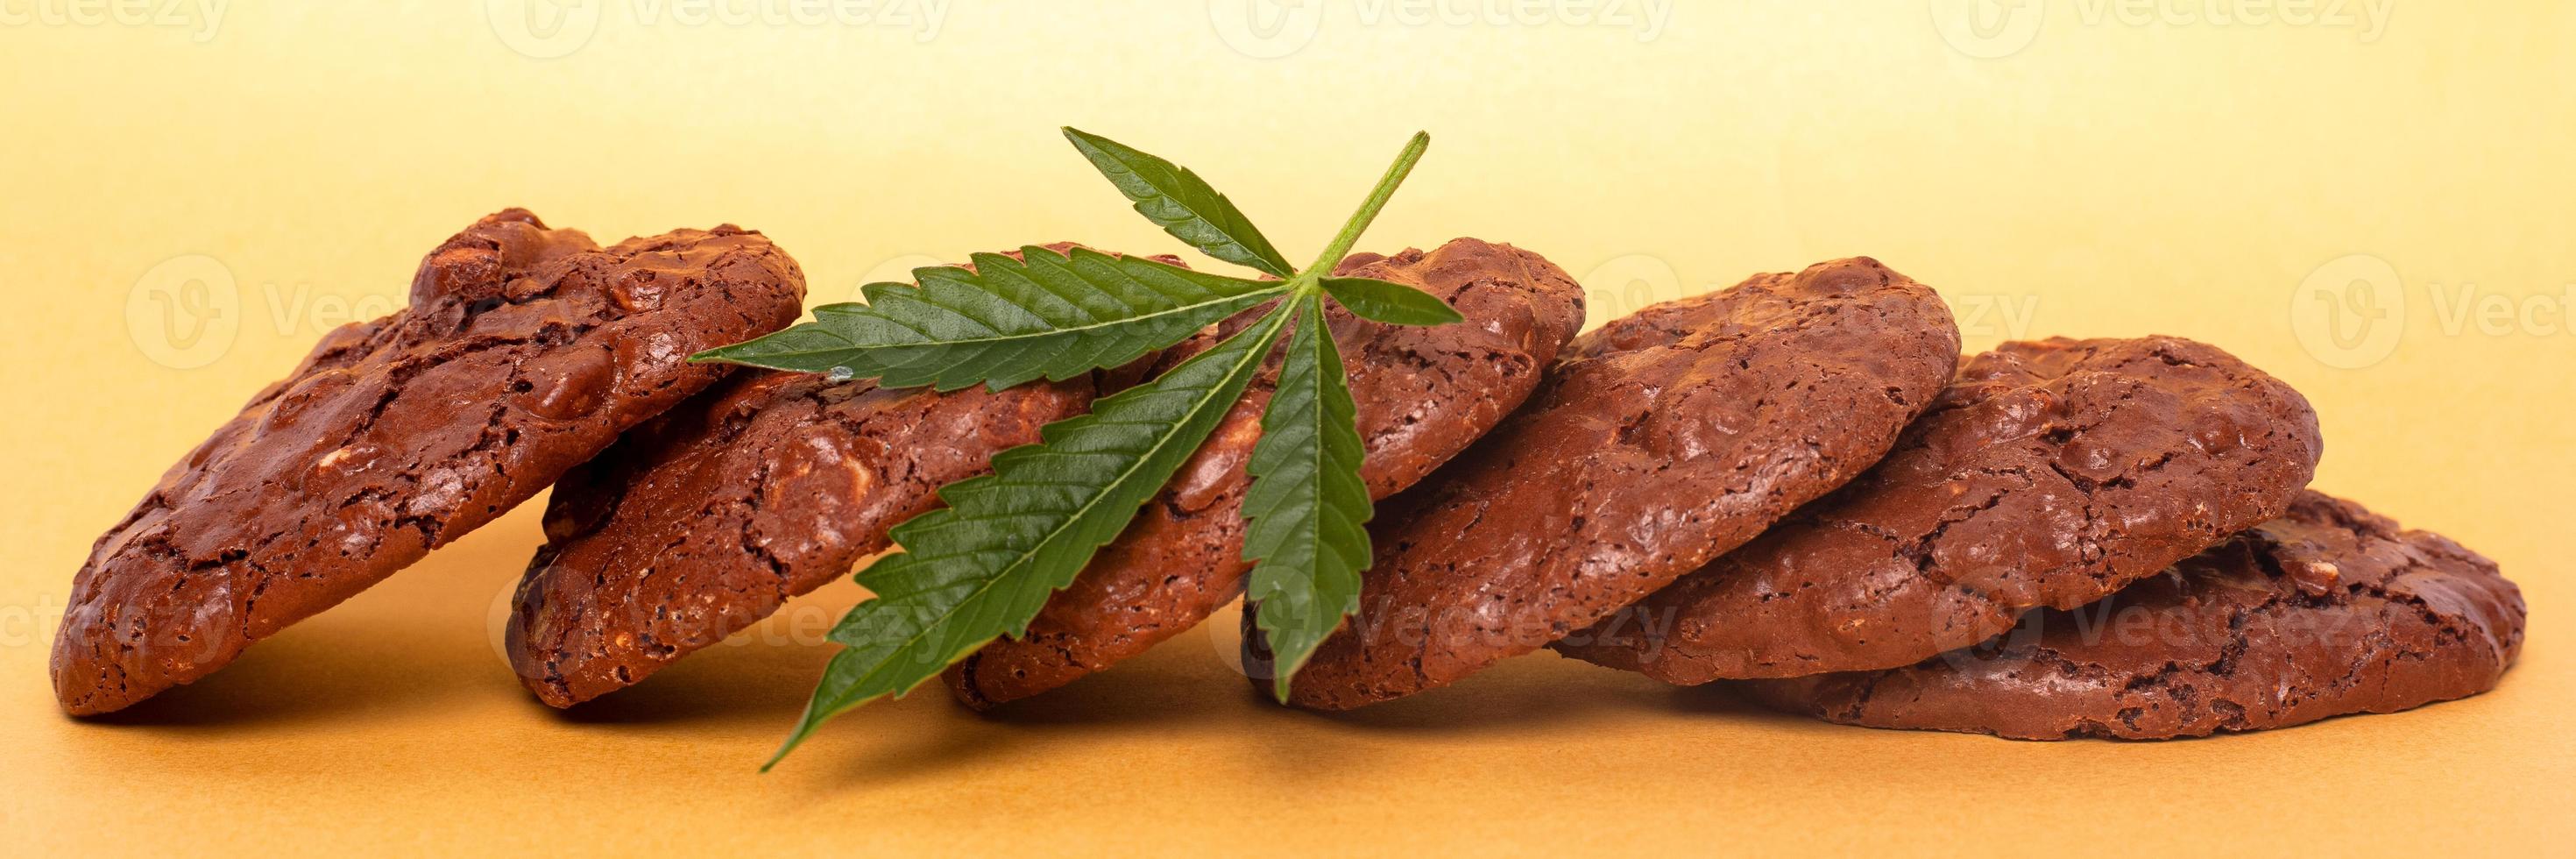 Marijuana oatmeal cookies and green leaf of cannabis on a yellow background photo